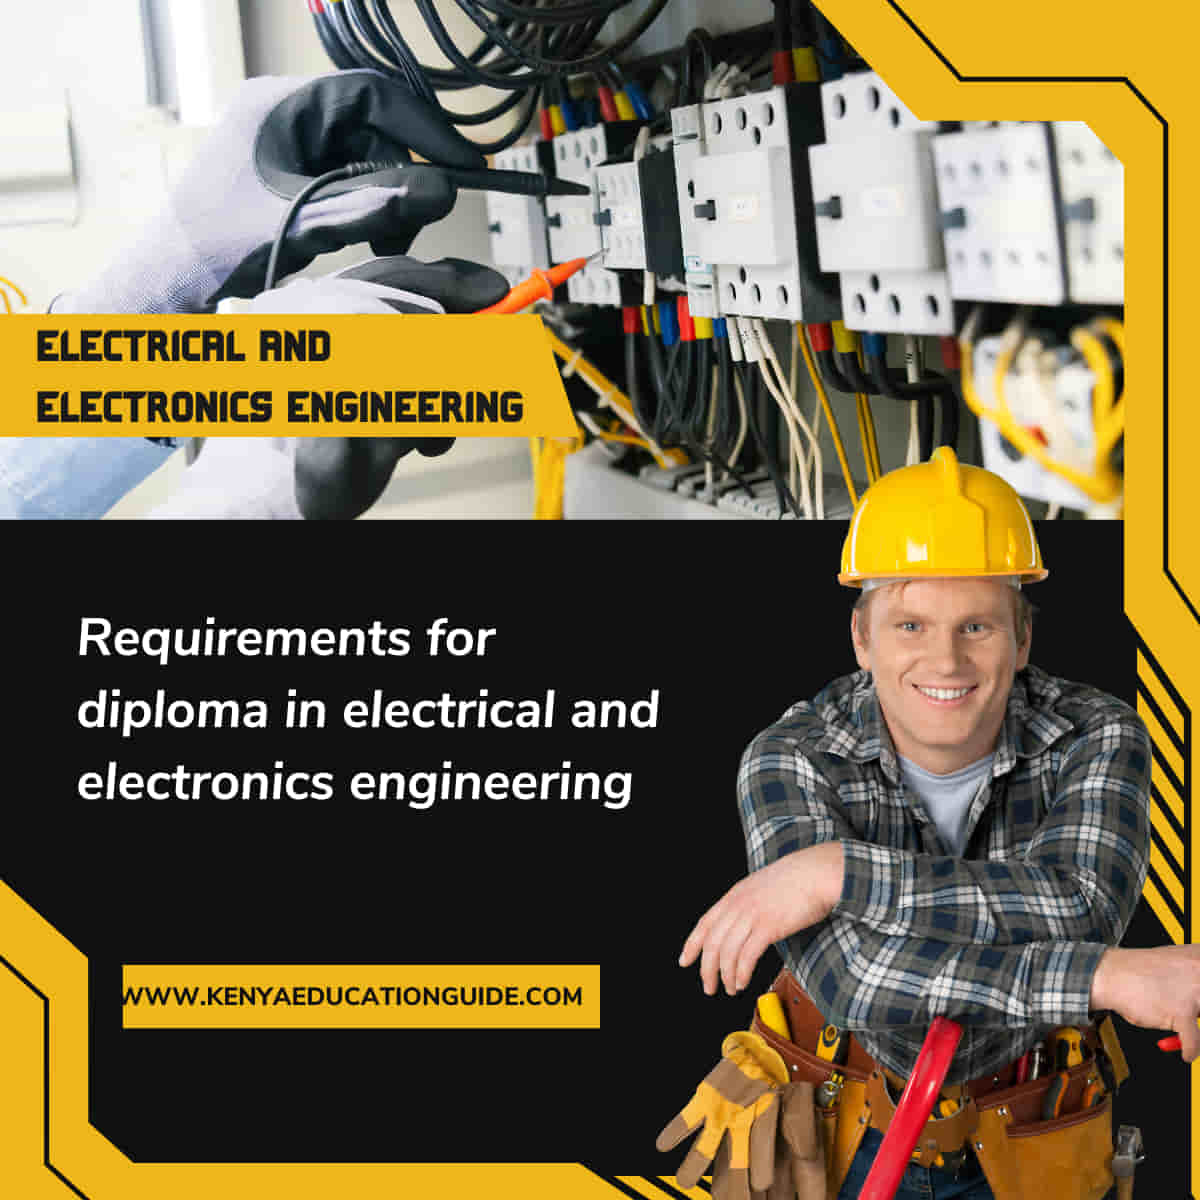 Requirements for diploma in electrical and electronics engineering